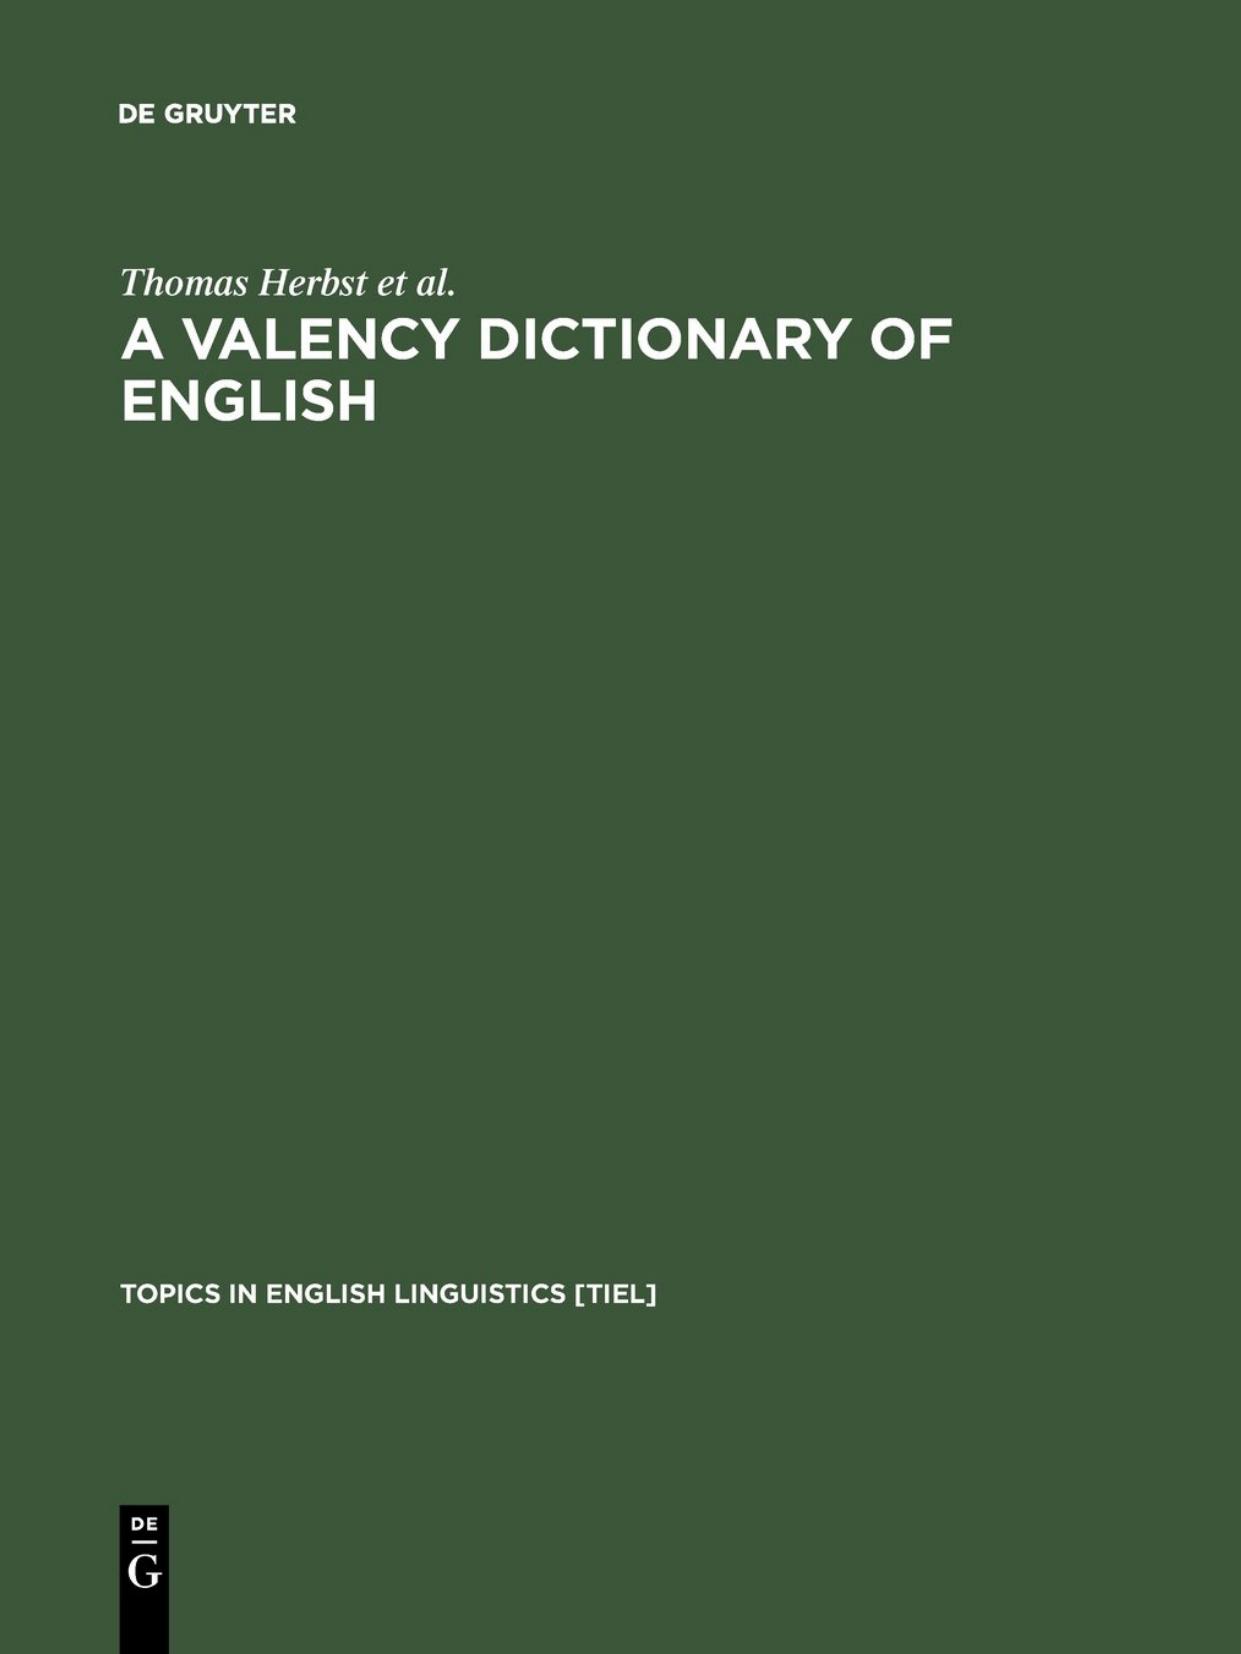 A Valency Dictionary of English: A Corpus-Based Analysis of the Complementation Patterns of English Verbs, Nouns, and Adjectives